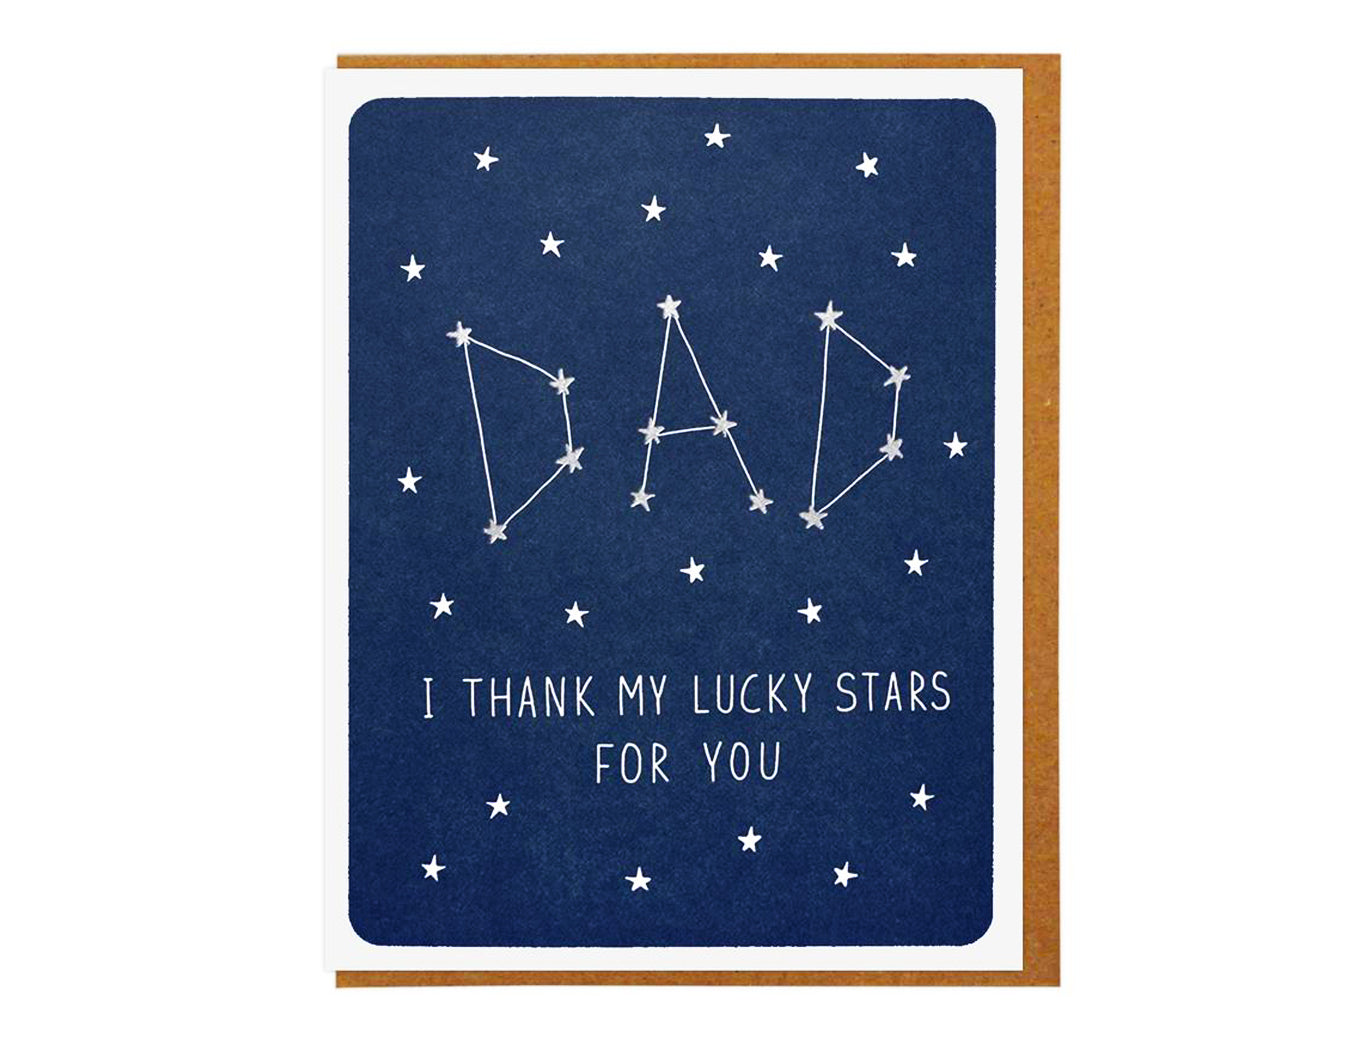 DARK BLUE BACKGROUND WITH STARS THAT SPELL DAD LIKE A CONSTELLATION AND TEXT READS DAD I THANK MY LUCKY STARS FOR YOU